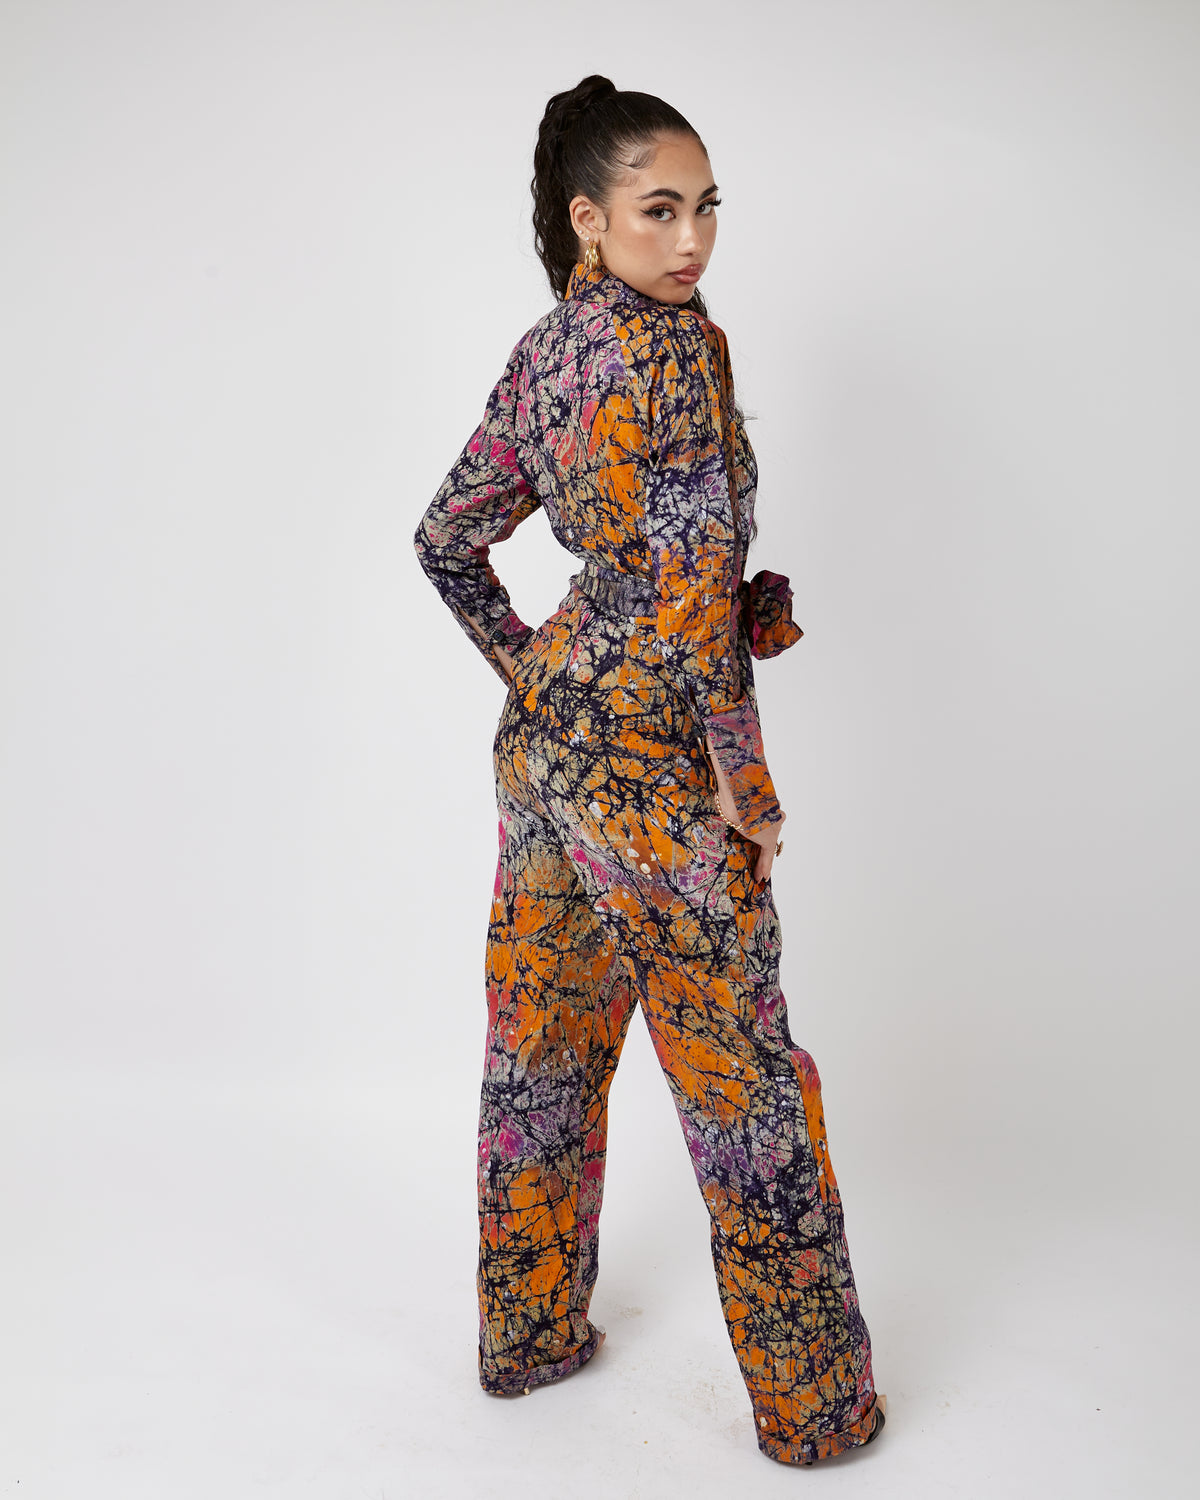 Angie Tie & Dye Jumpsuit - OHEMA OHENE AFRICAN INSPIRED FASHION